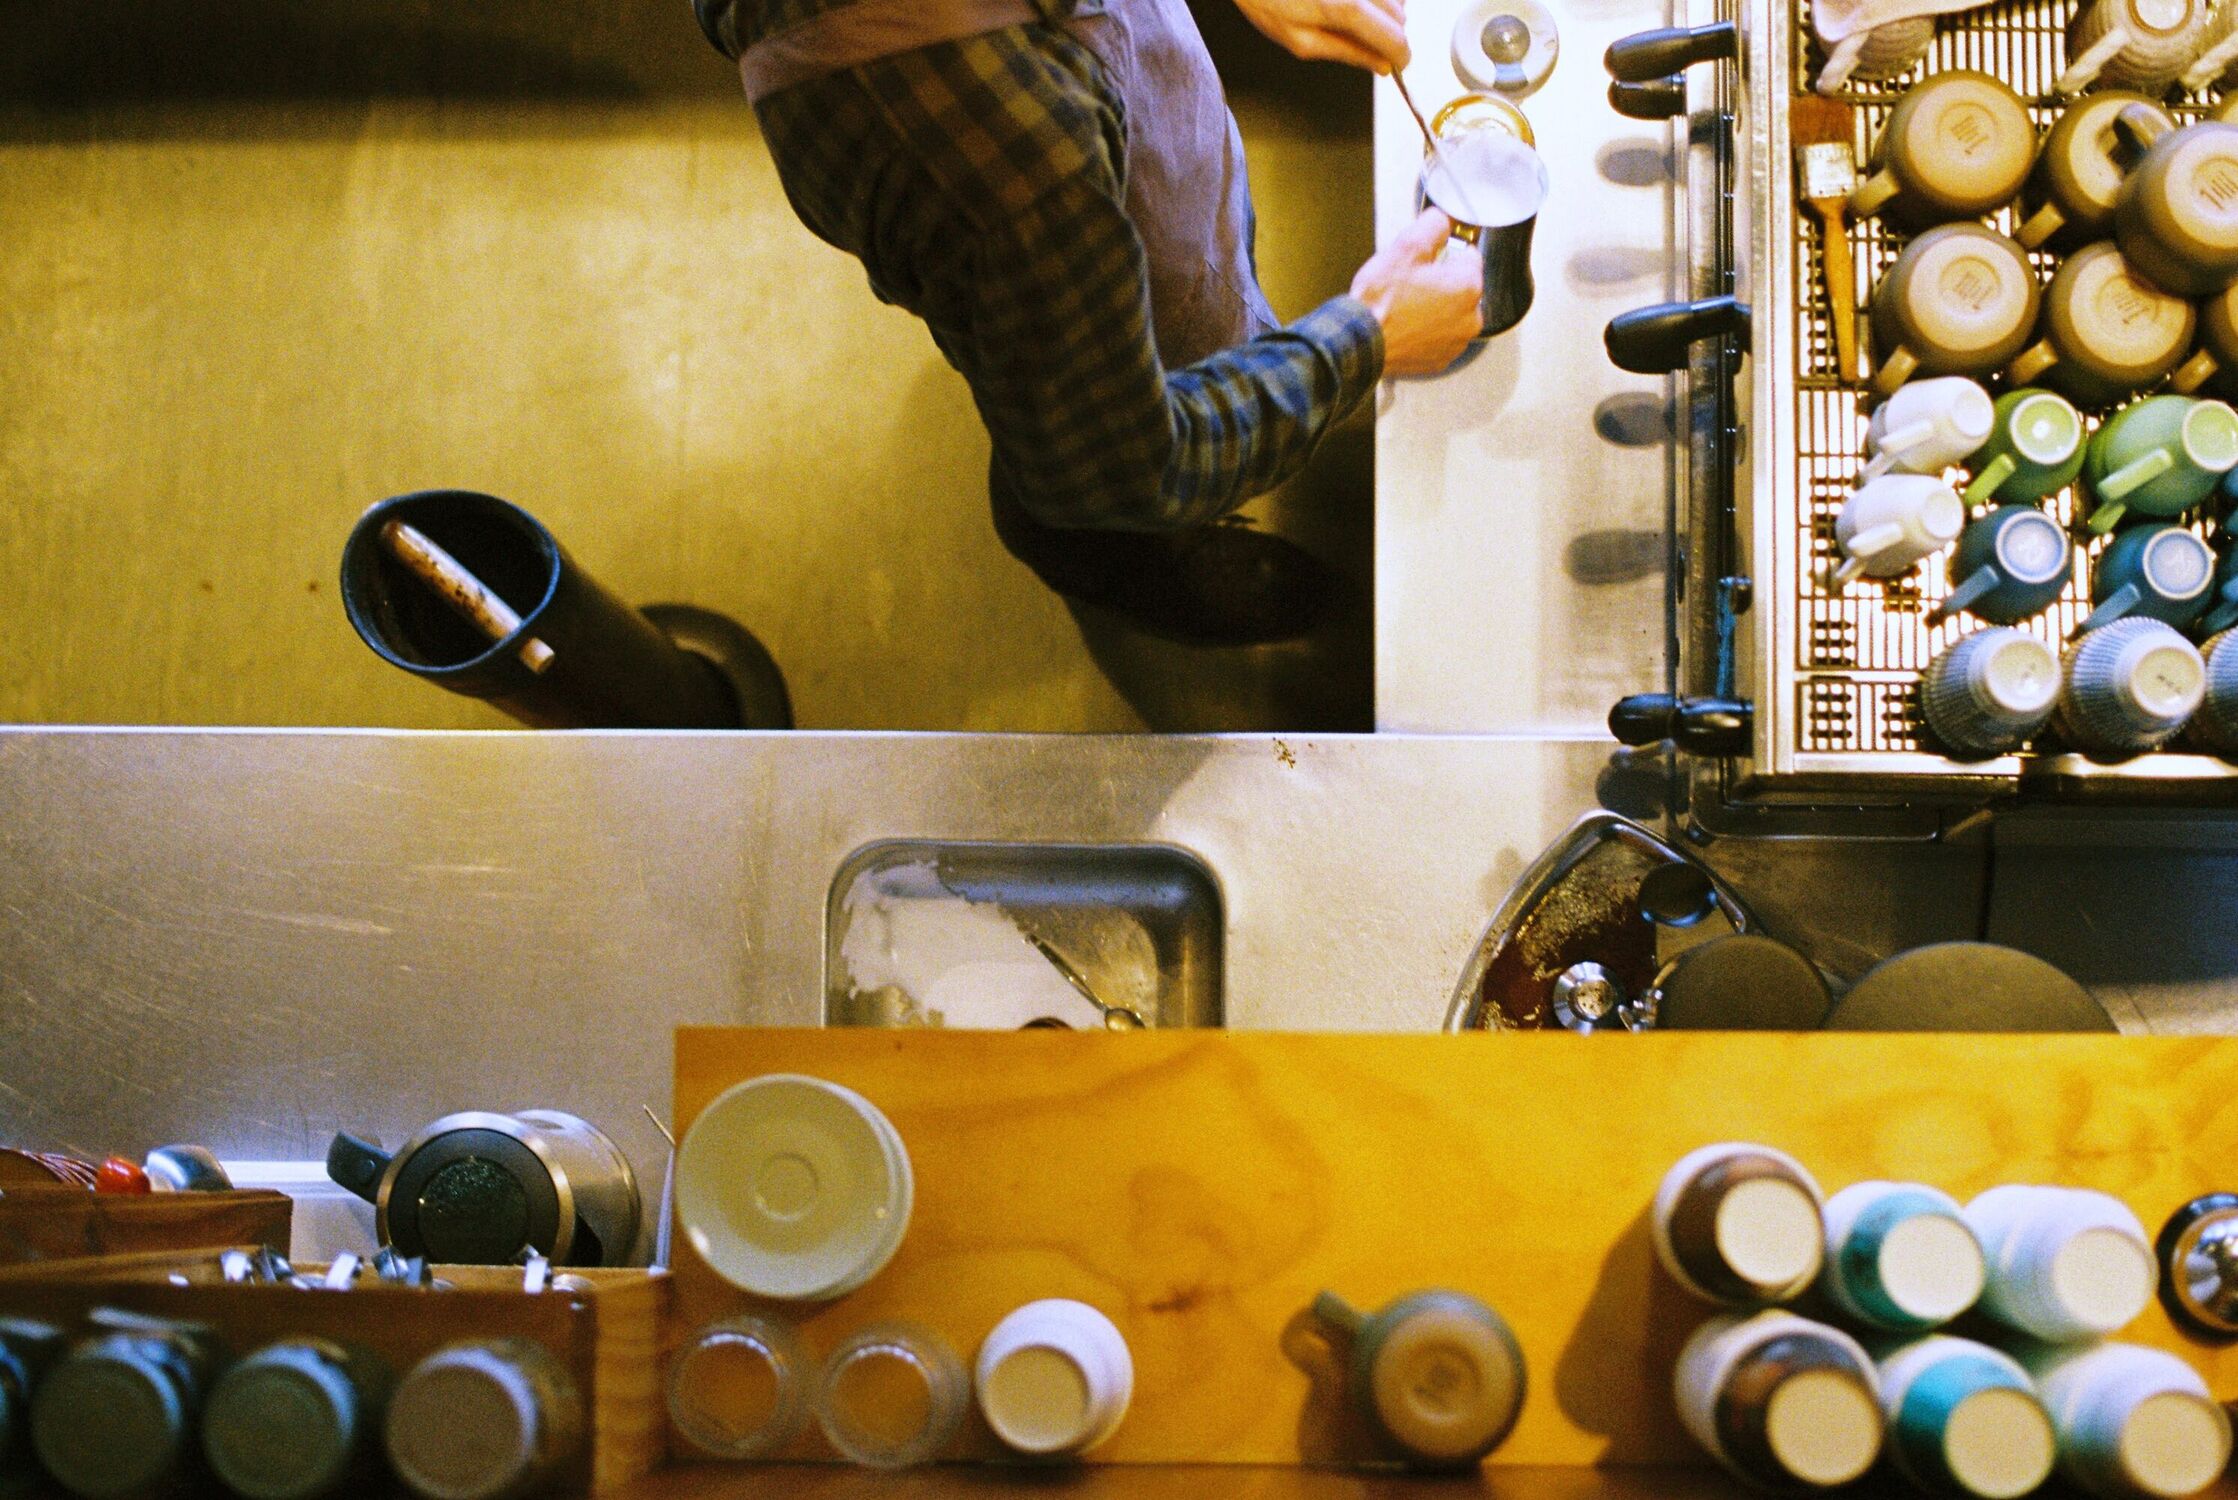 A barista makes espresso shot from directly above